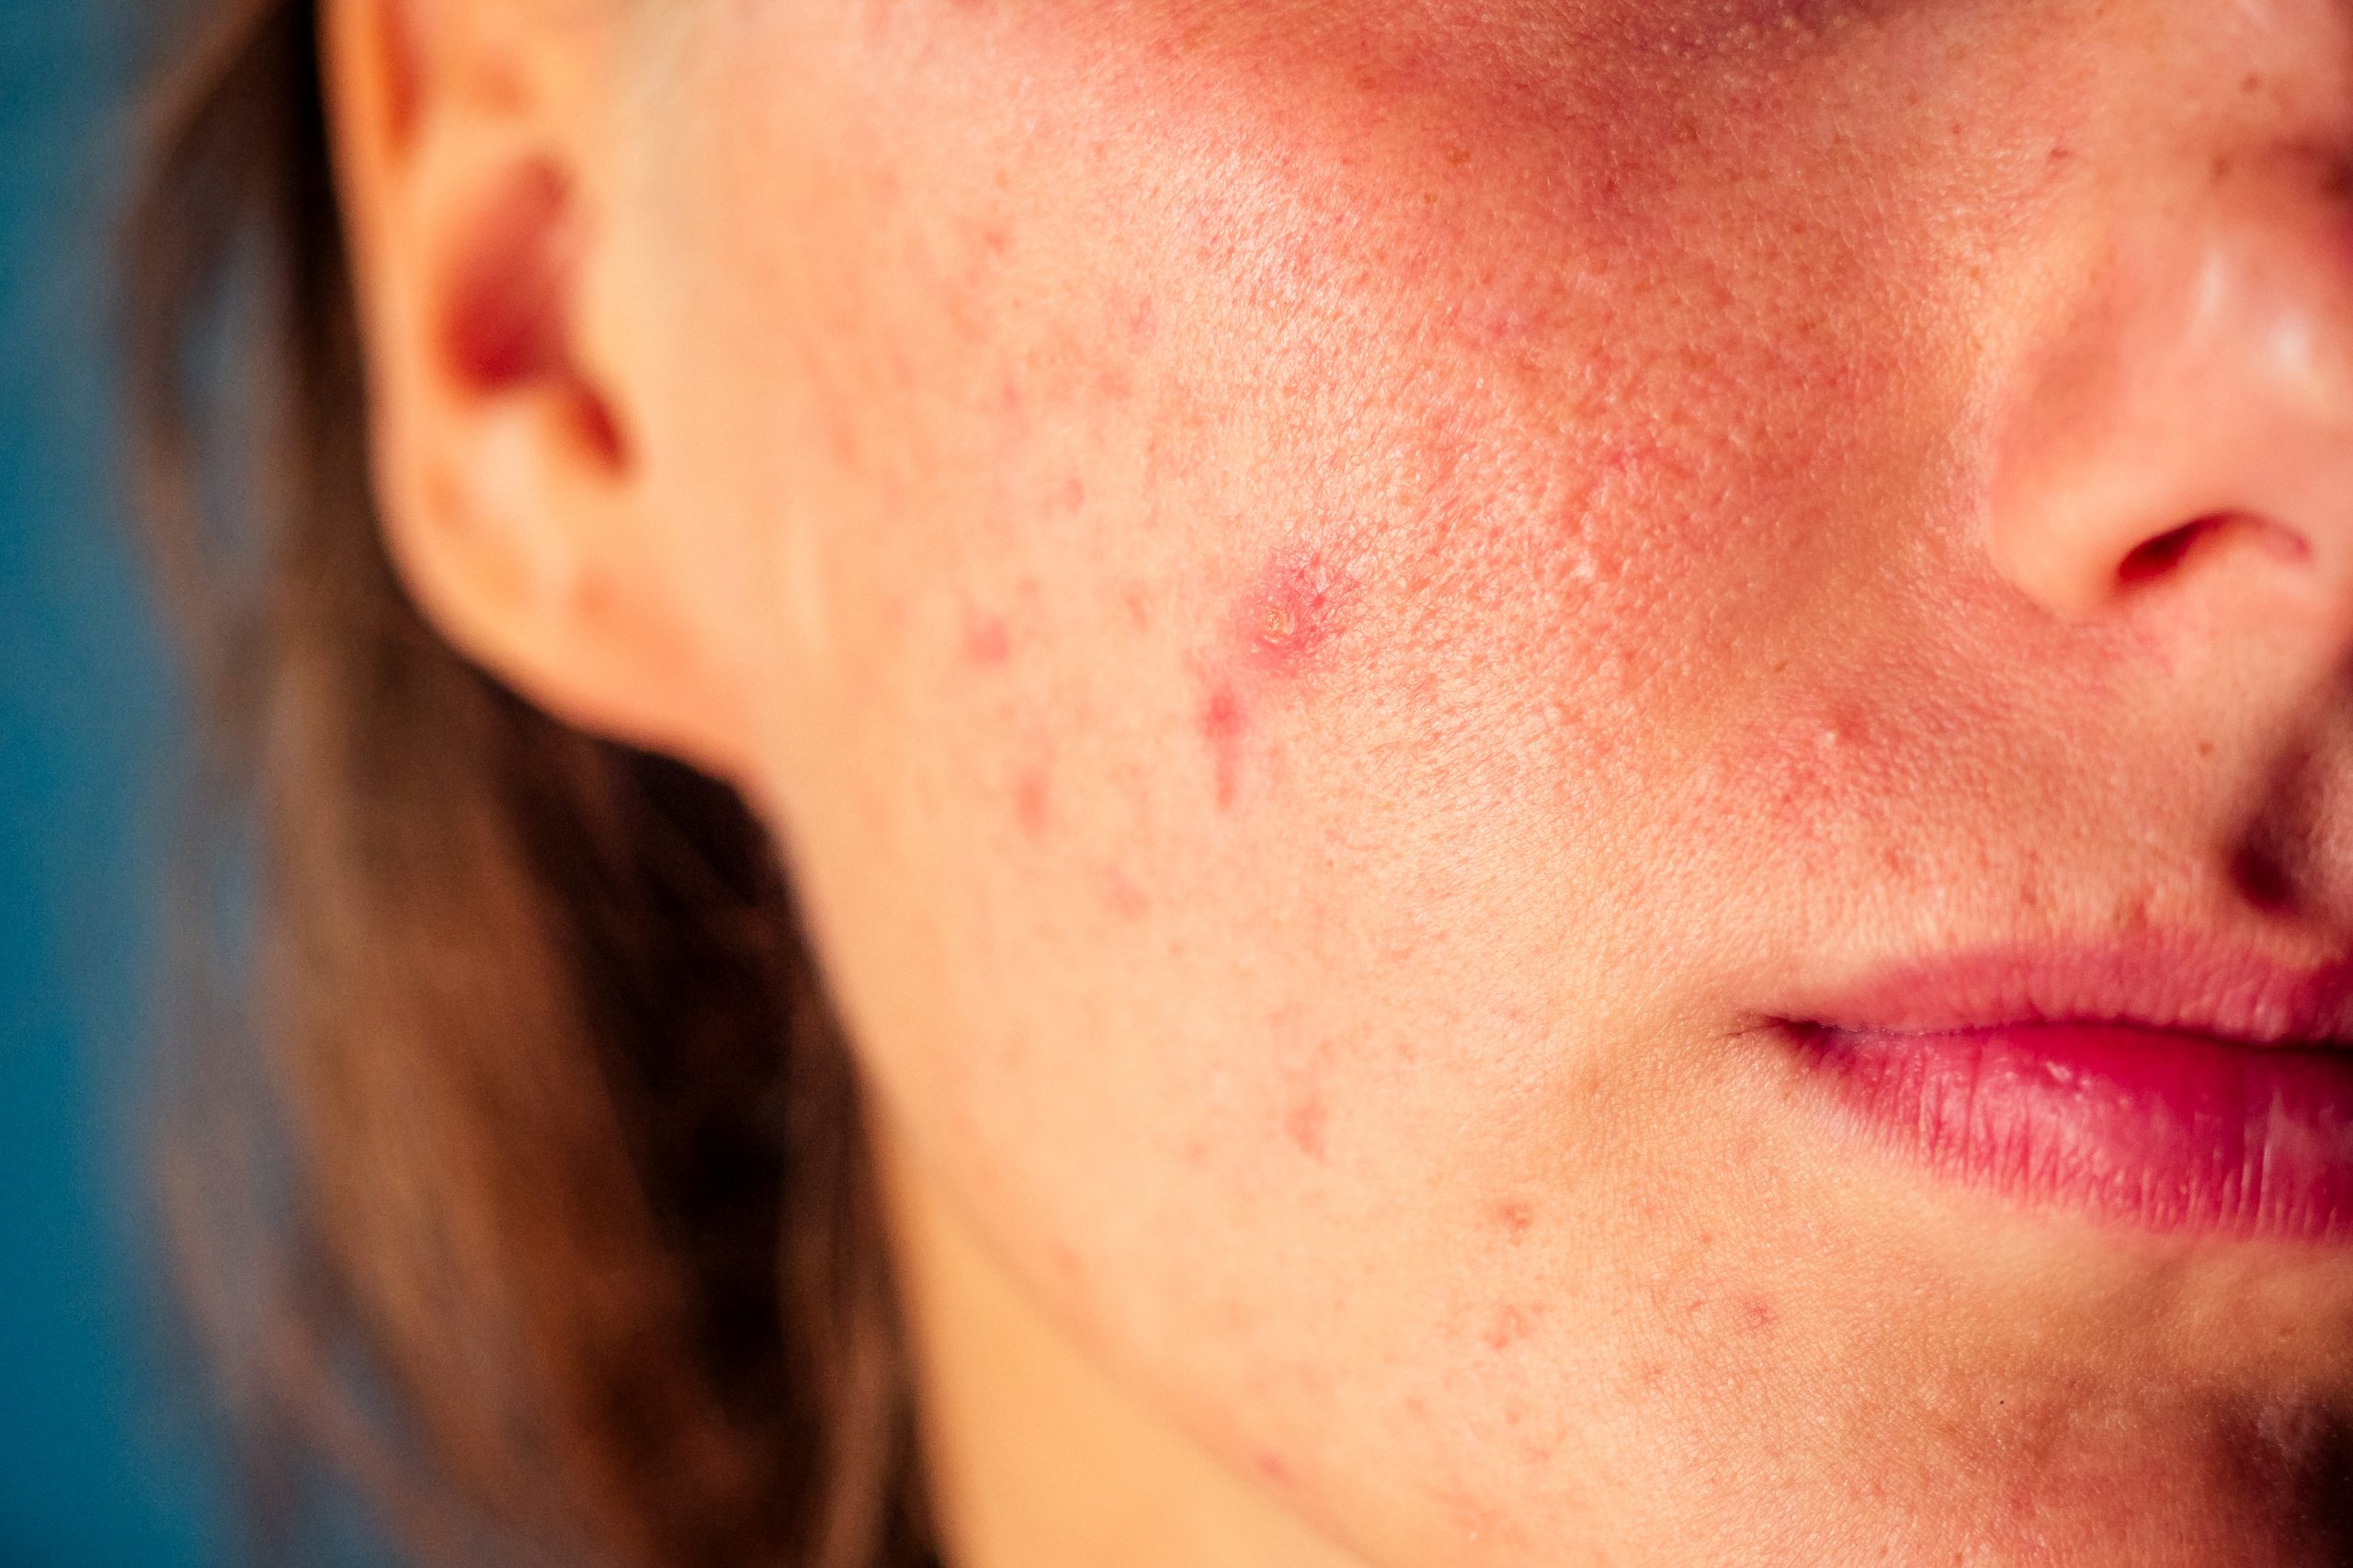 post-acne, scars and red festering pimples on the face of a young woman. concept of skin problems and harmonic failure.